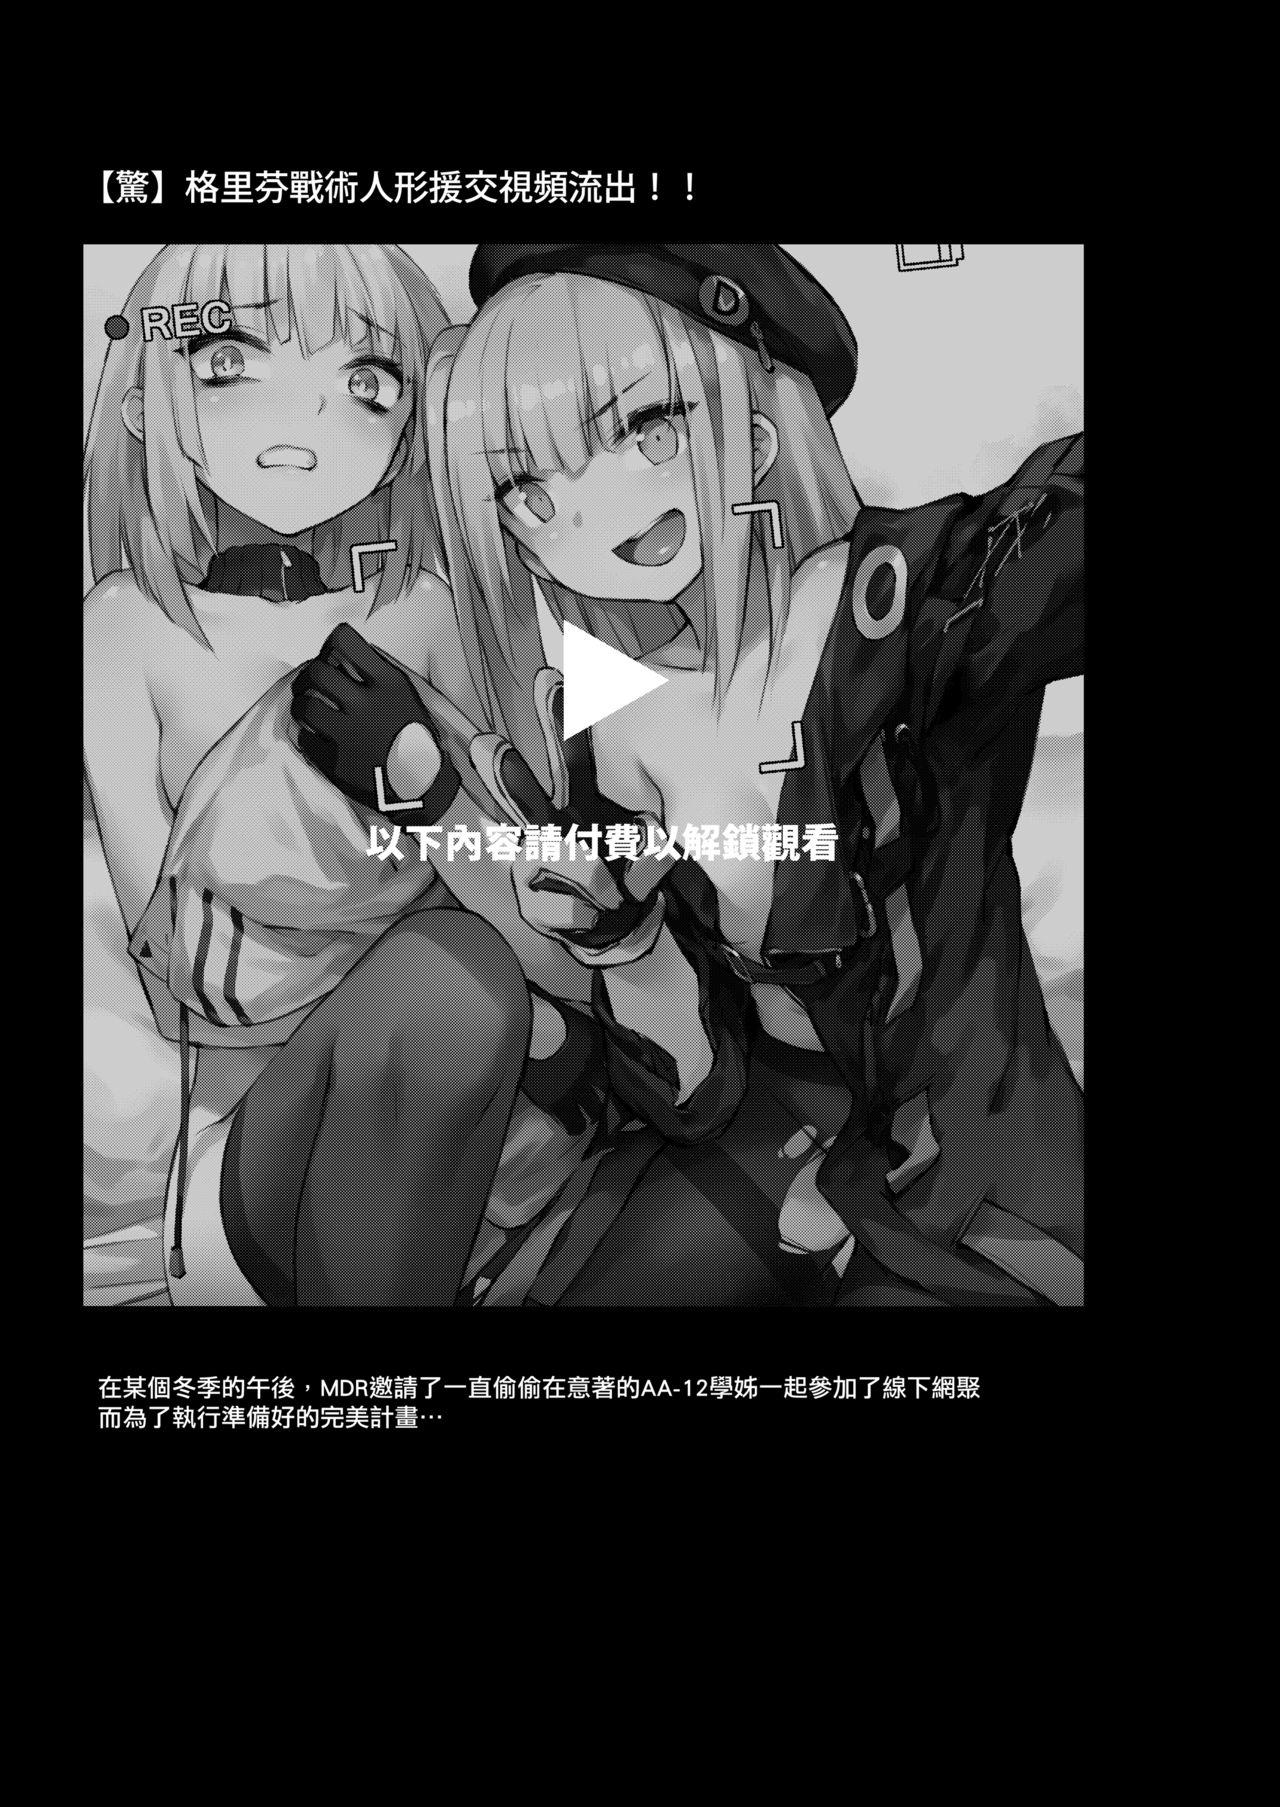 Fake A Video of Griffin T-Dolls Having Sex For Money Just Leaked! - Girls frontline Anal Play - Page 2